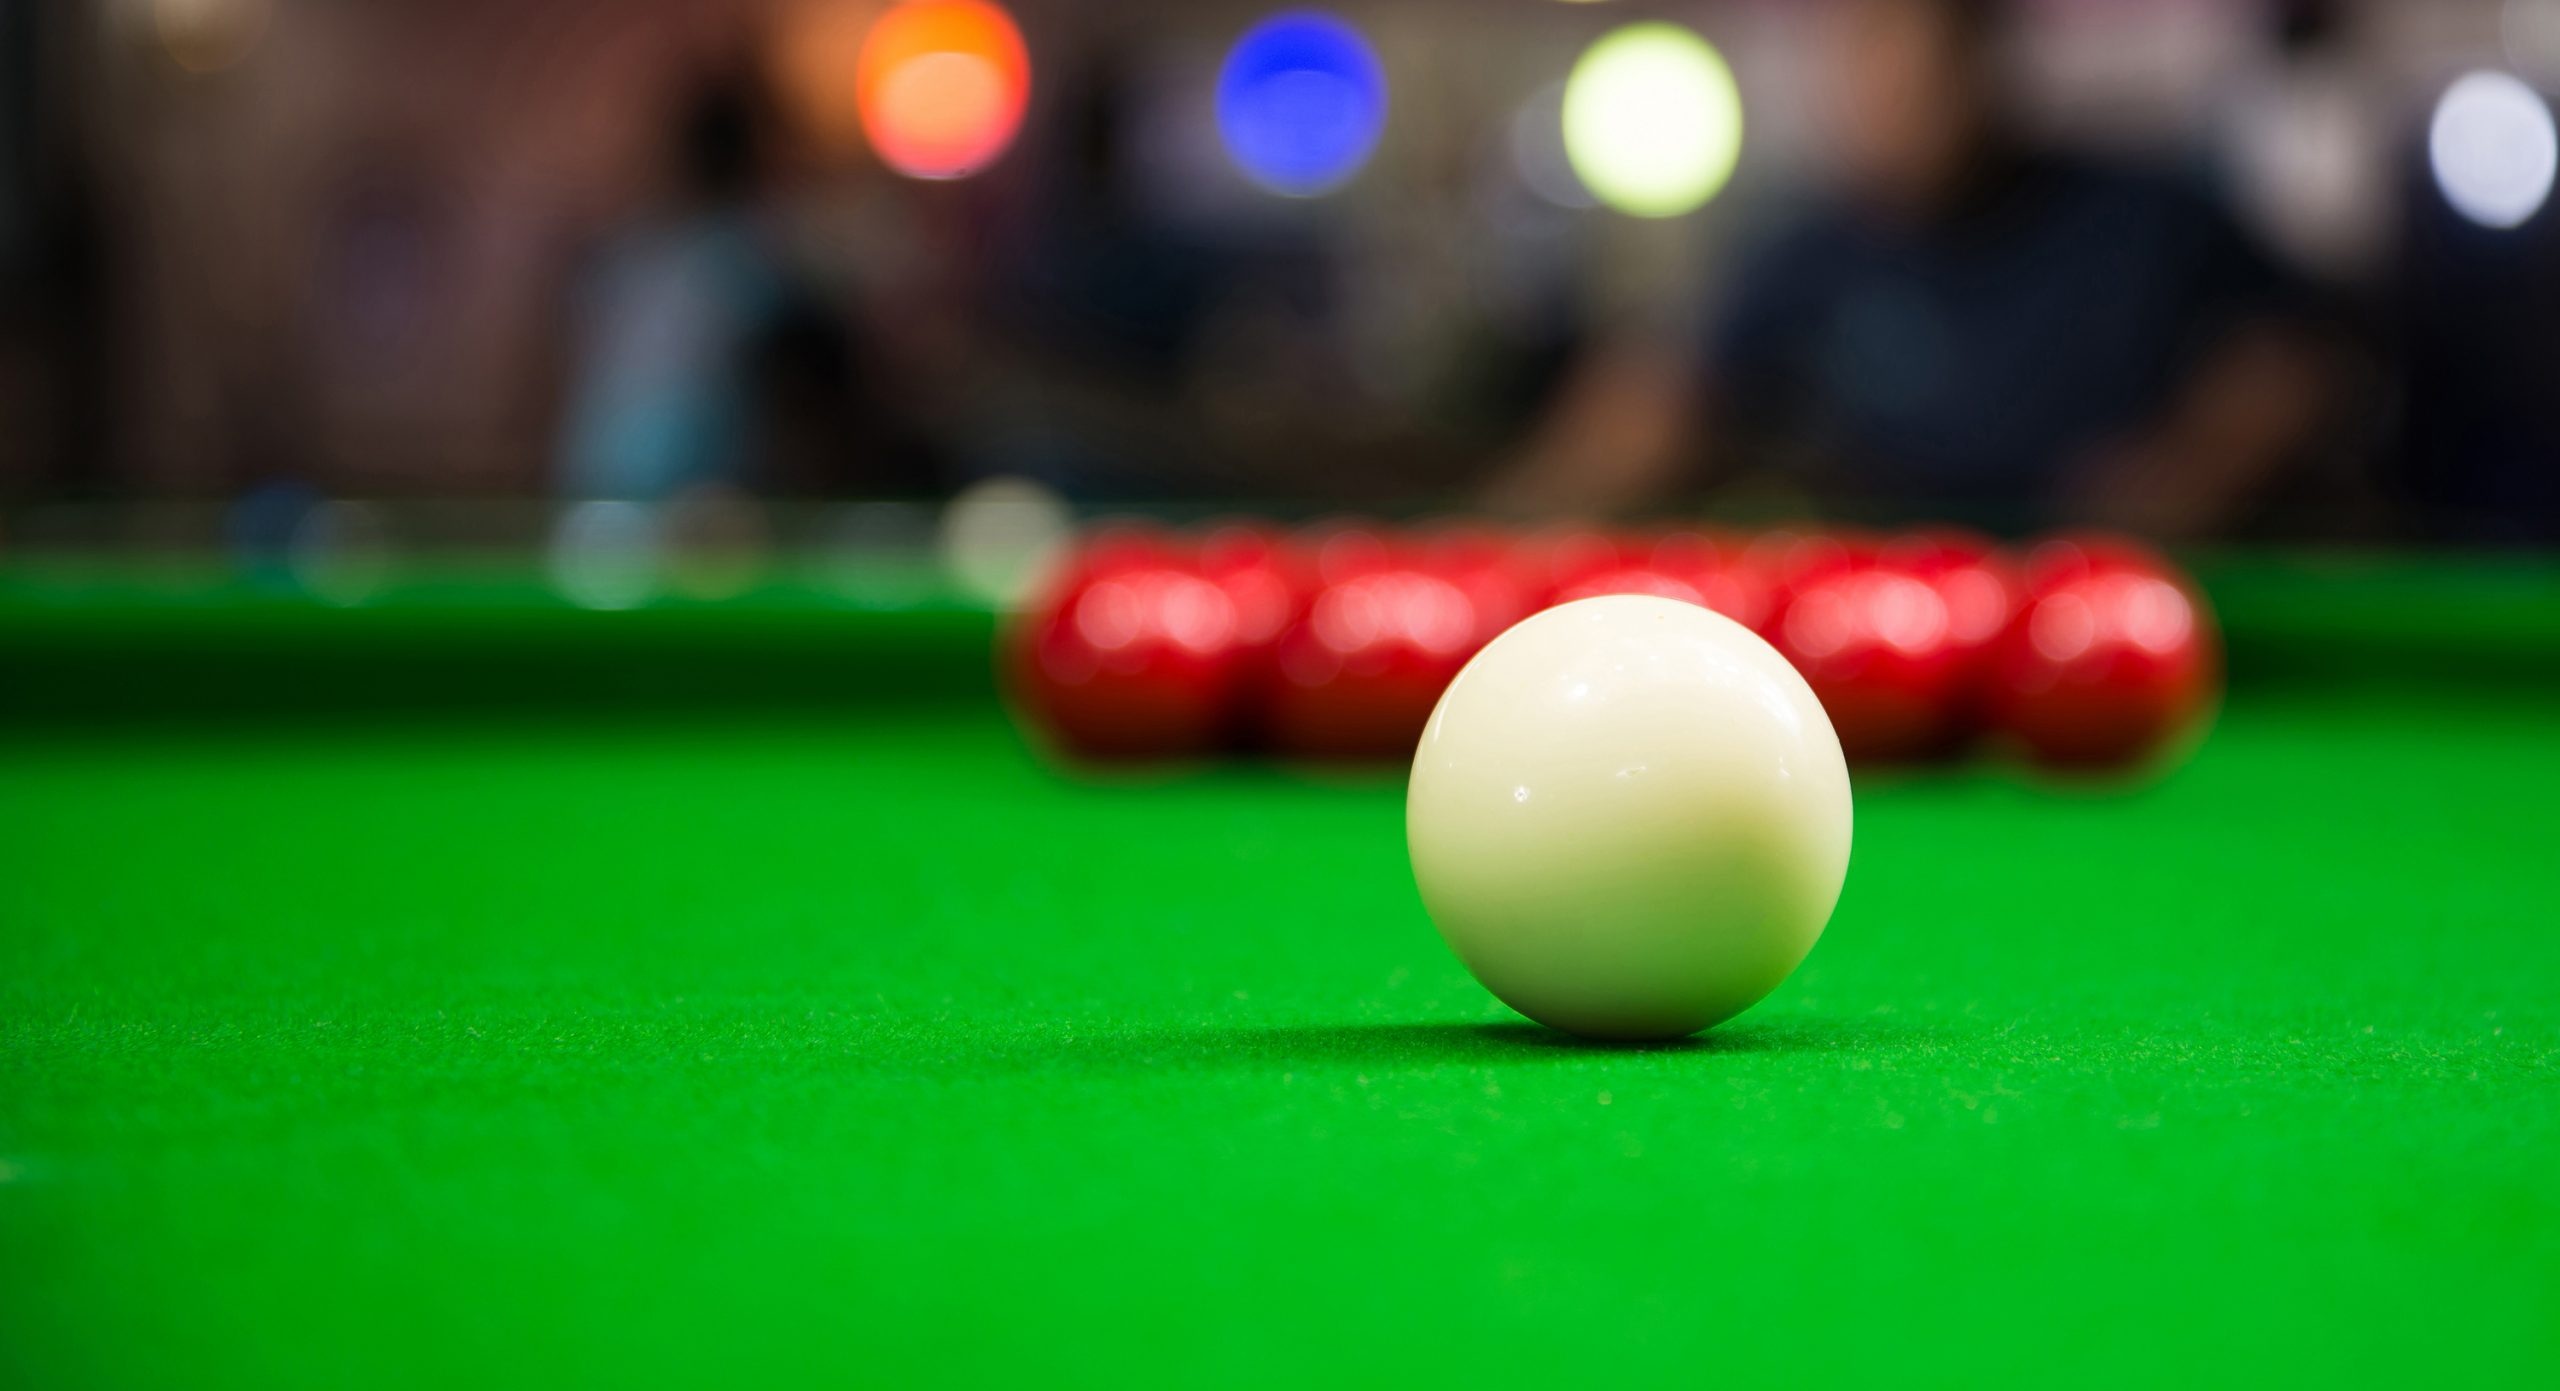 Snooker: A Classical English cue sport played on a rectangular table covered with a green cloth called baize. 2560x1400 HD Wallpaper.